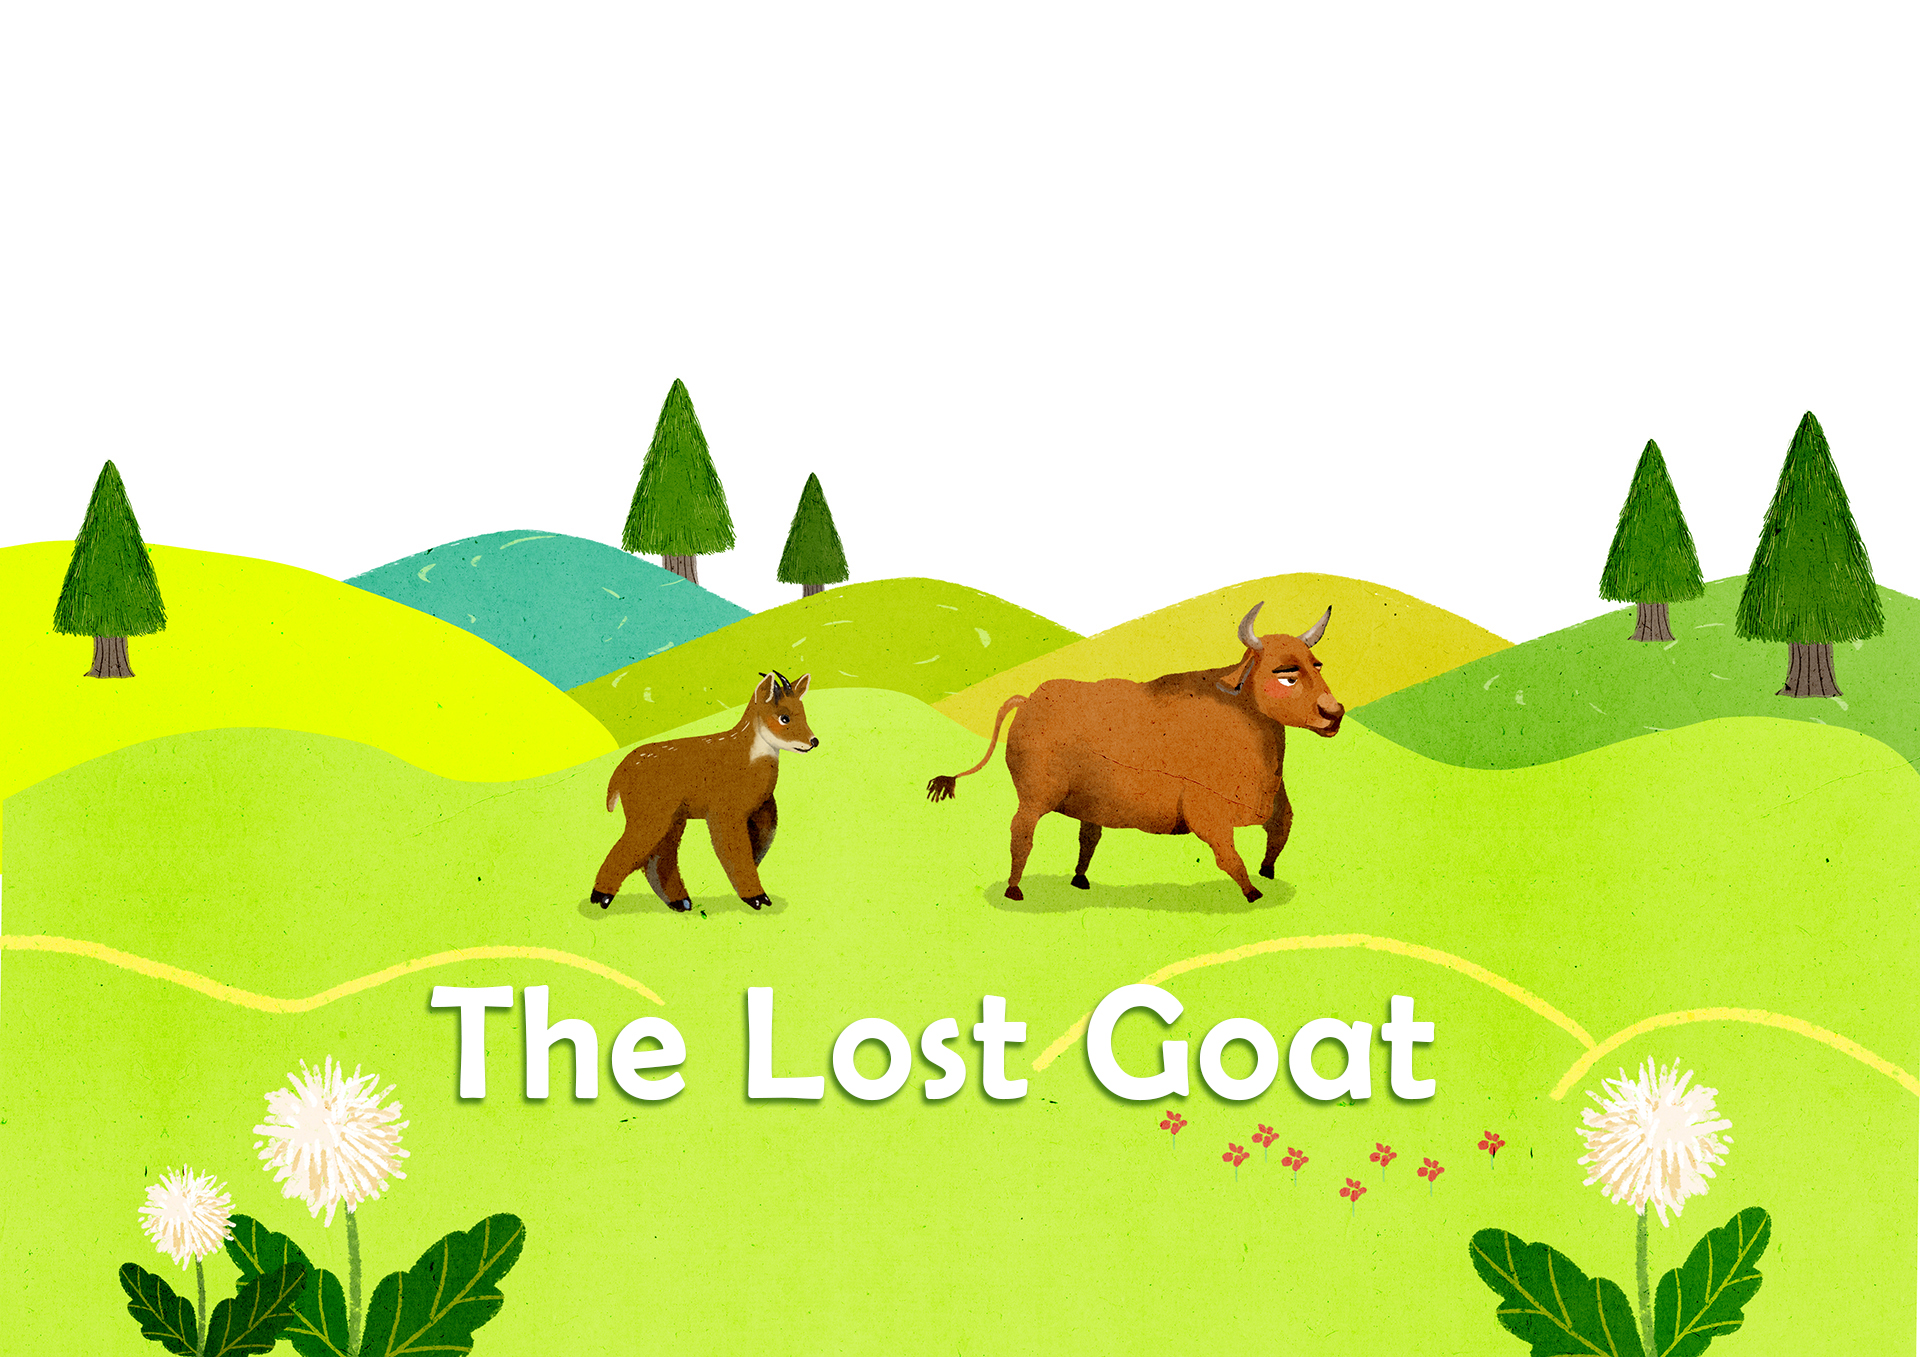  The Lost Goat